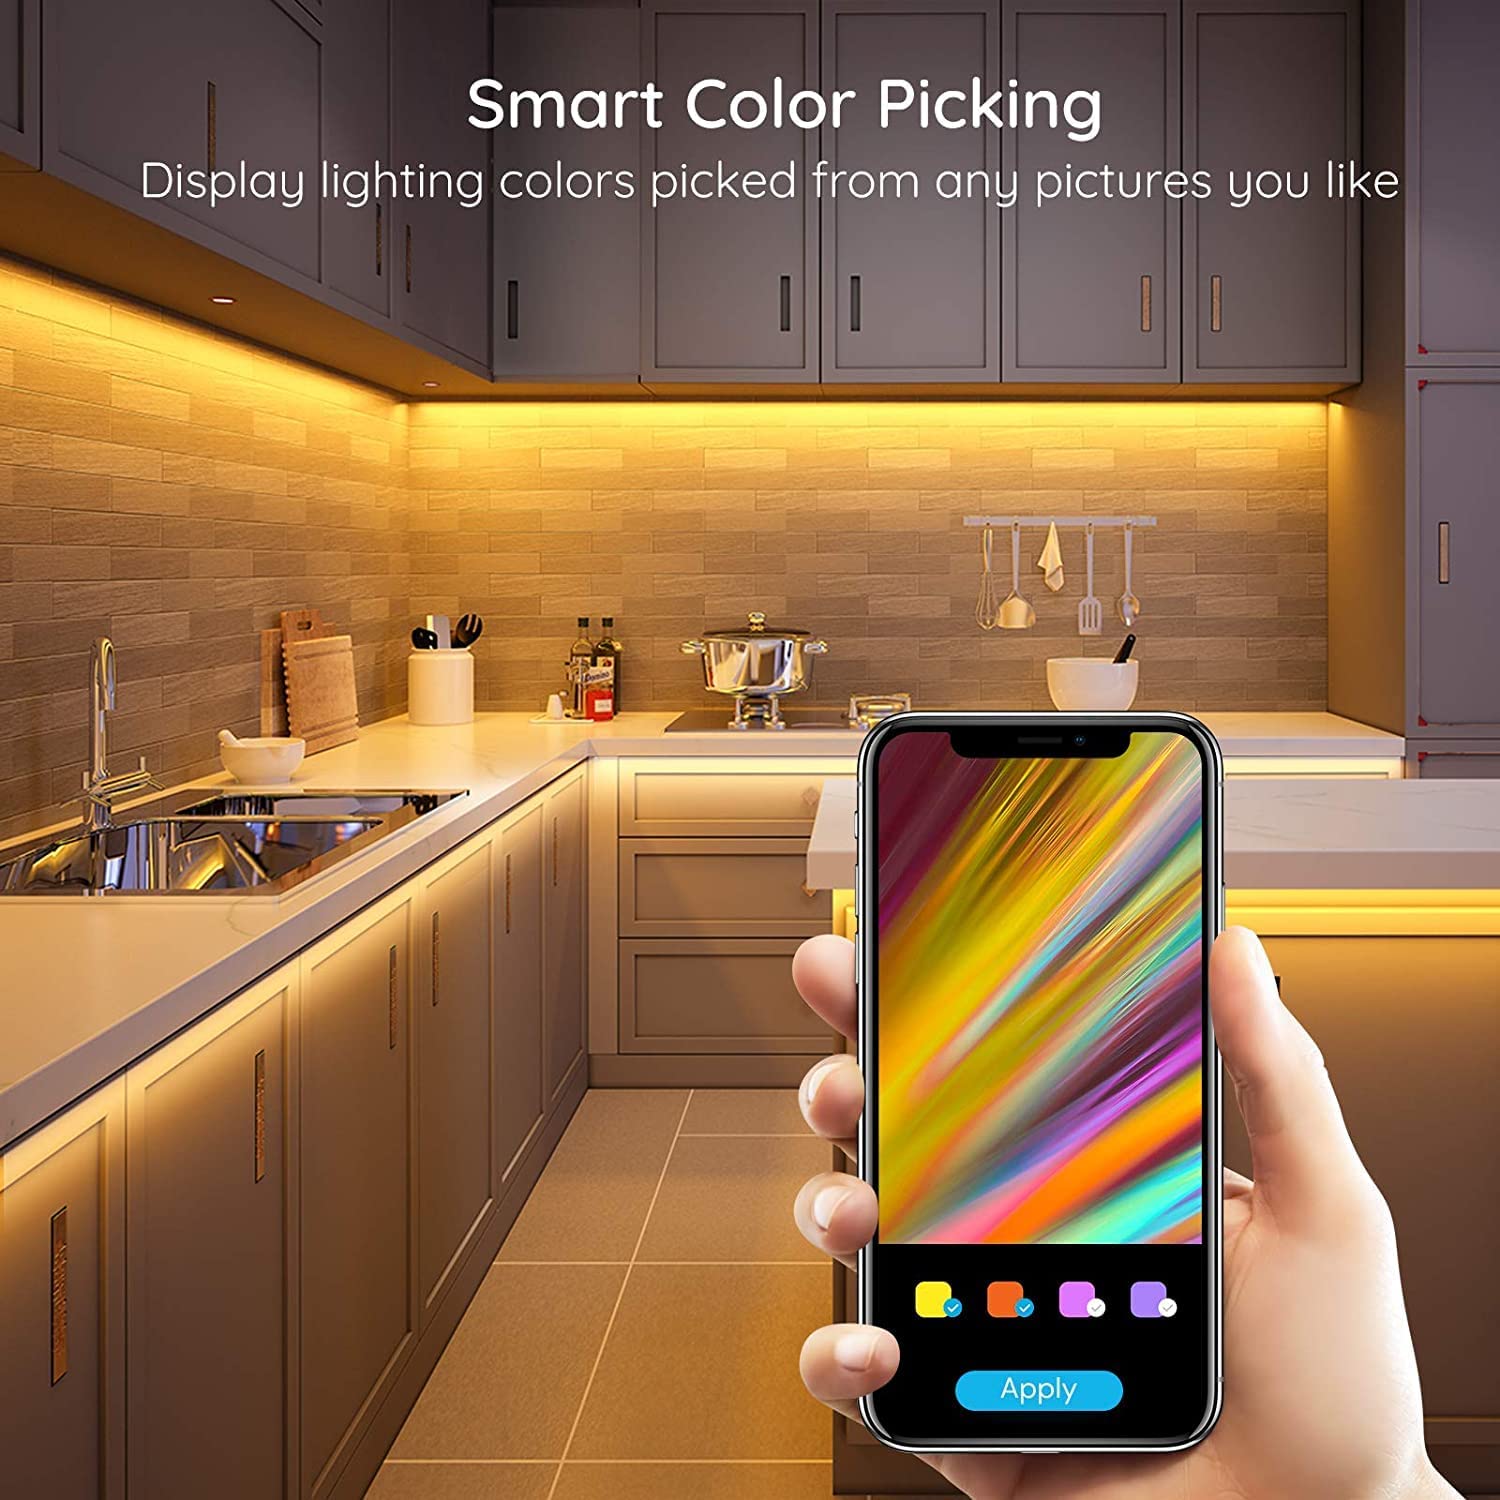 https://discounttoday.net/wp-content/uploads/2022/11/Govee-65.6ft-Alexa-LED-Strip-Lights-Smart-WiFi-RGB-Rope-Light-Works-with-Alexa-Google-Assistant-Remote-App-Control-Lighting-Kit-Music-Sync-Color-Changing-Lights-for-Bedroom-Living-Room-Kitchen7.jpg